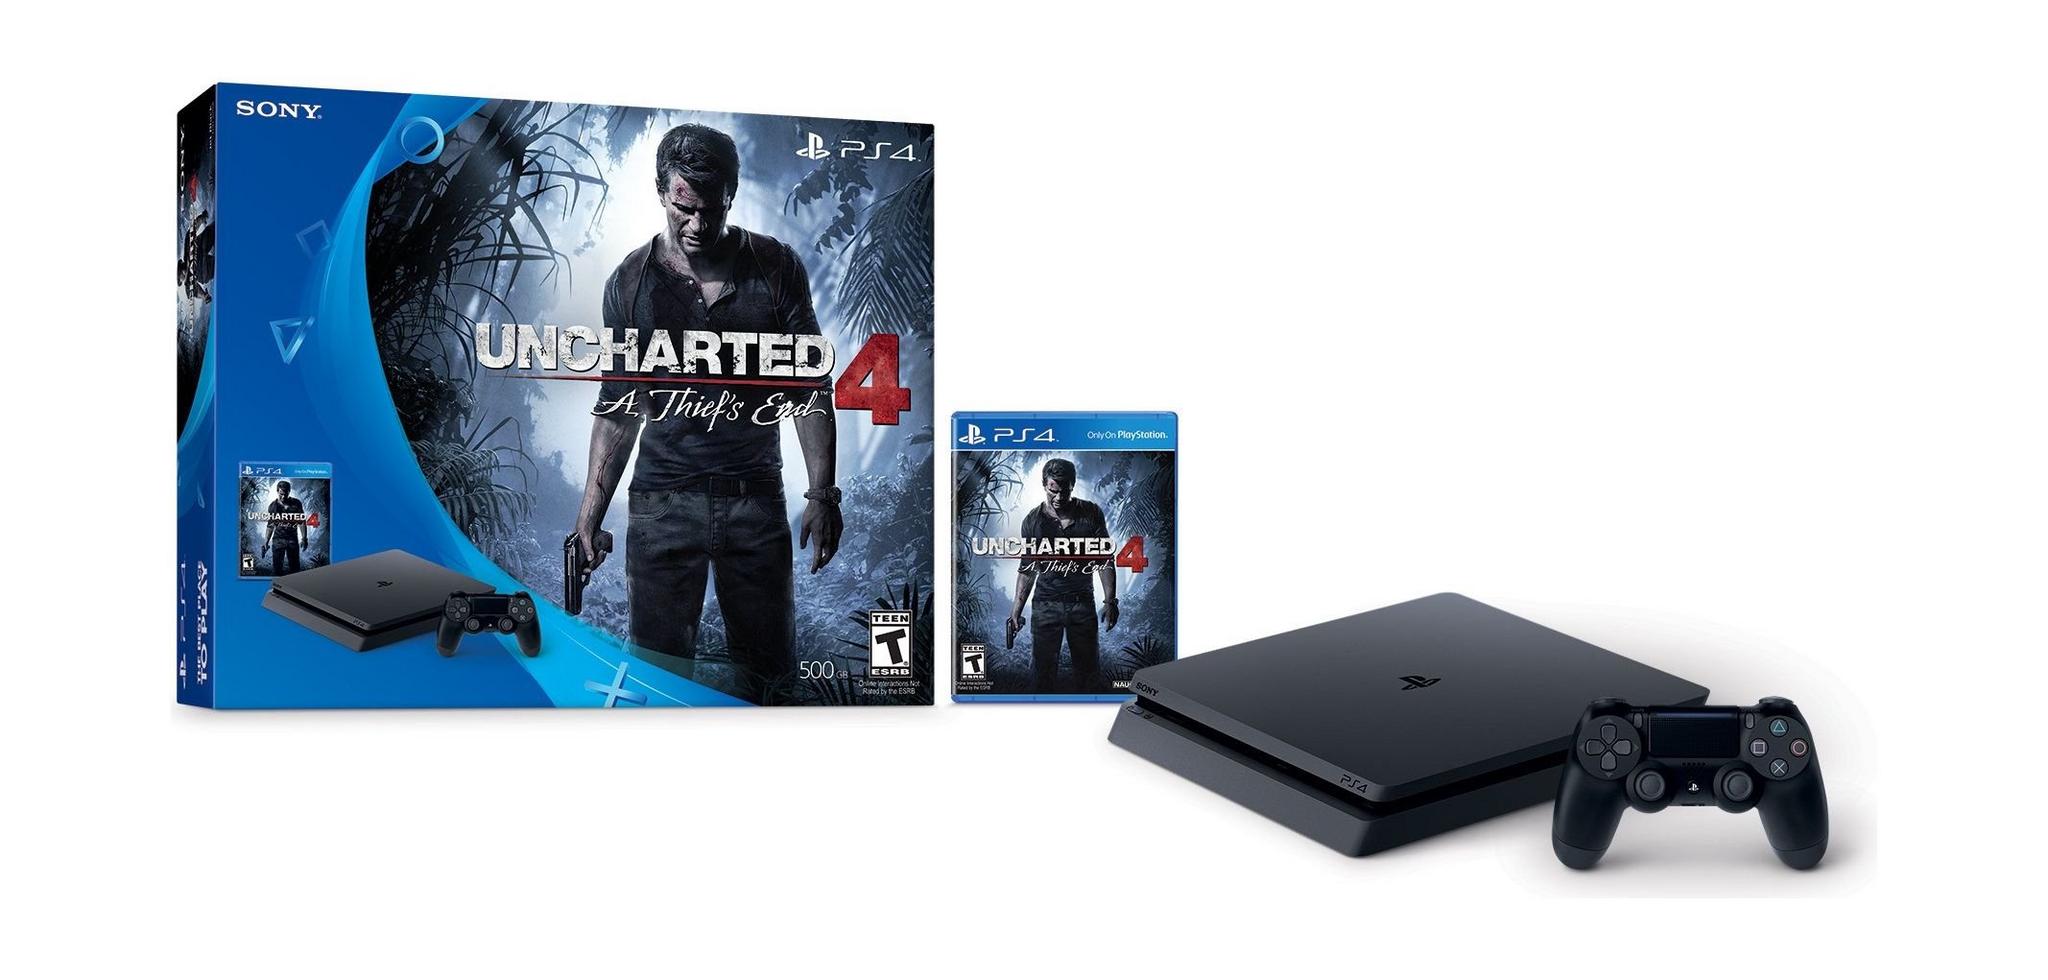 Sony PS4 Slim 500GB Console(NTSC) + Uncharted 4 PS4 Game + Sony PlayStation 4 DS4 Controller + Homefront: The Revolution - PS4 Game